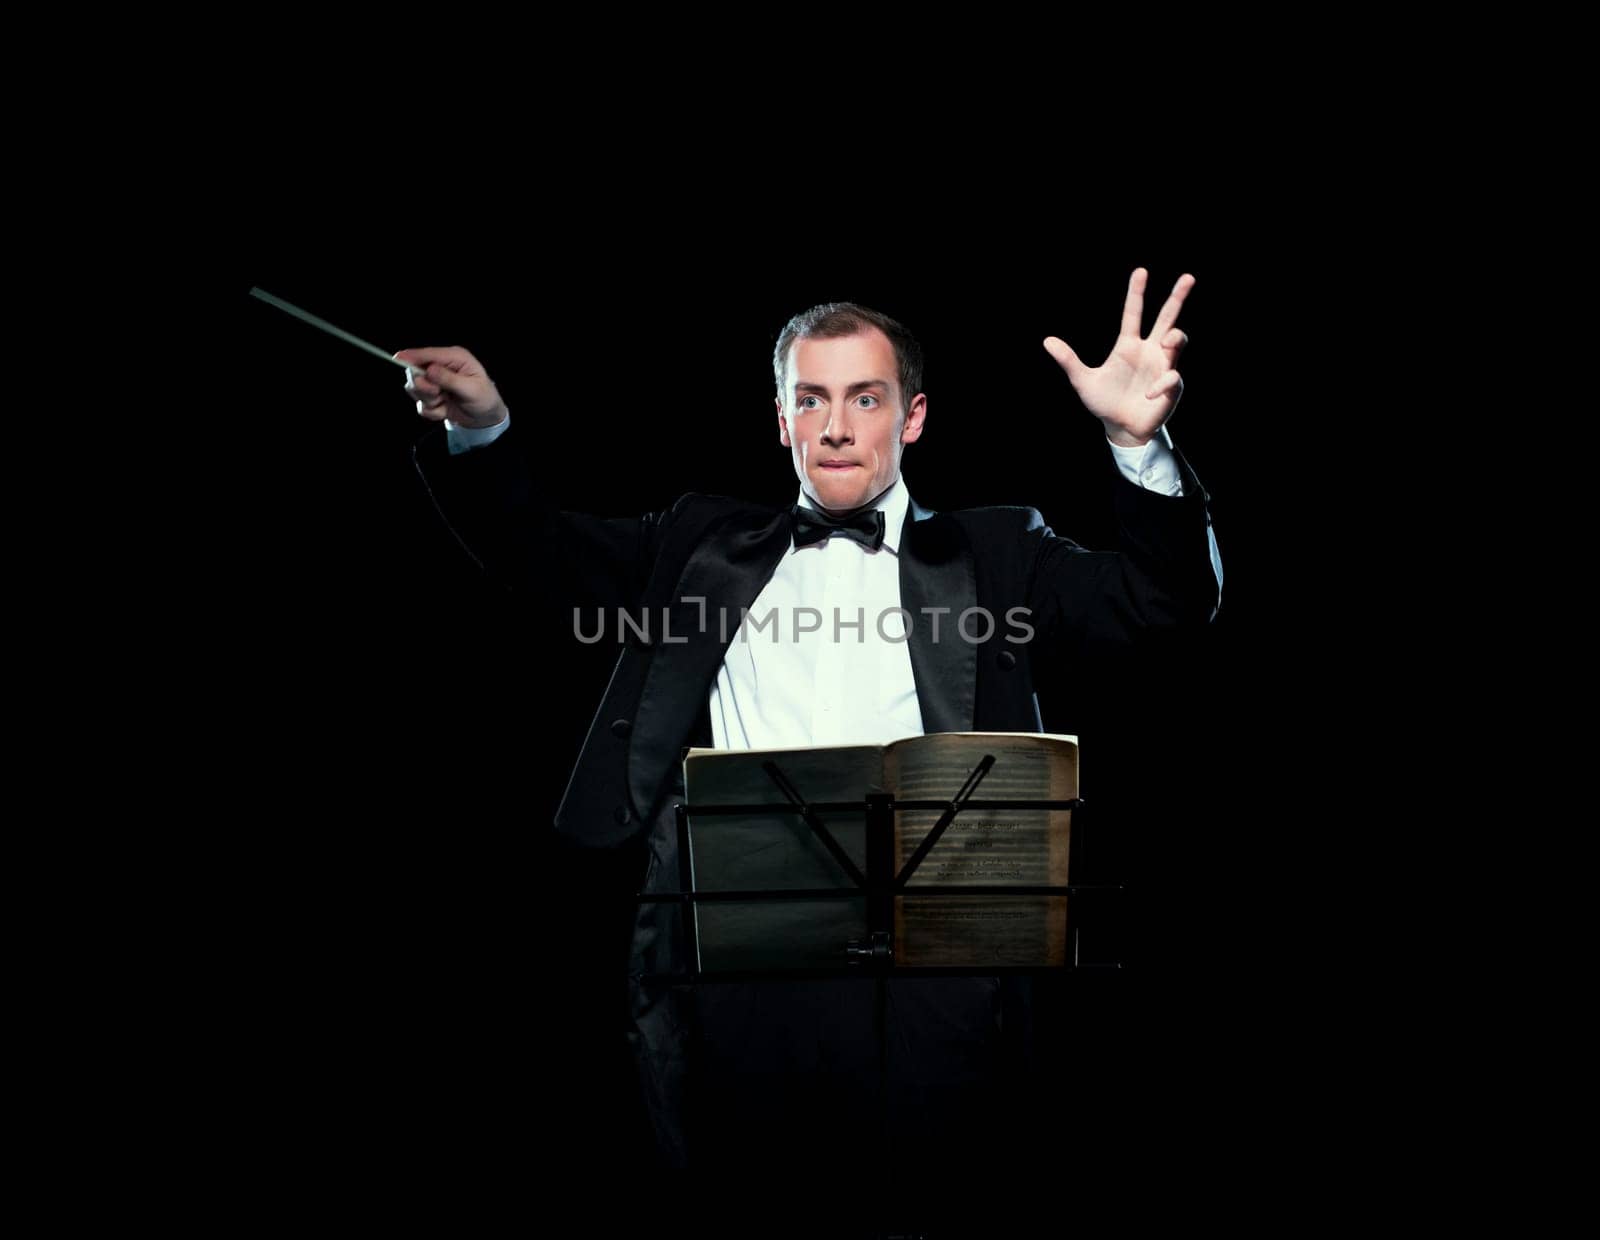 Shot of music director conducting with inspiration by rivertime